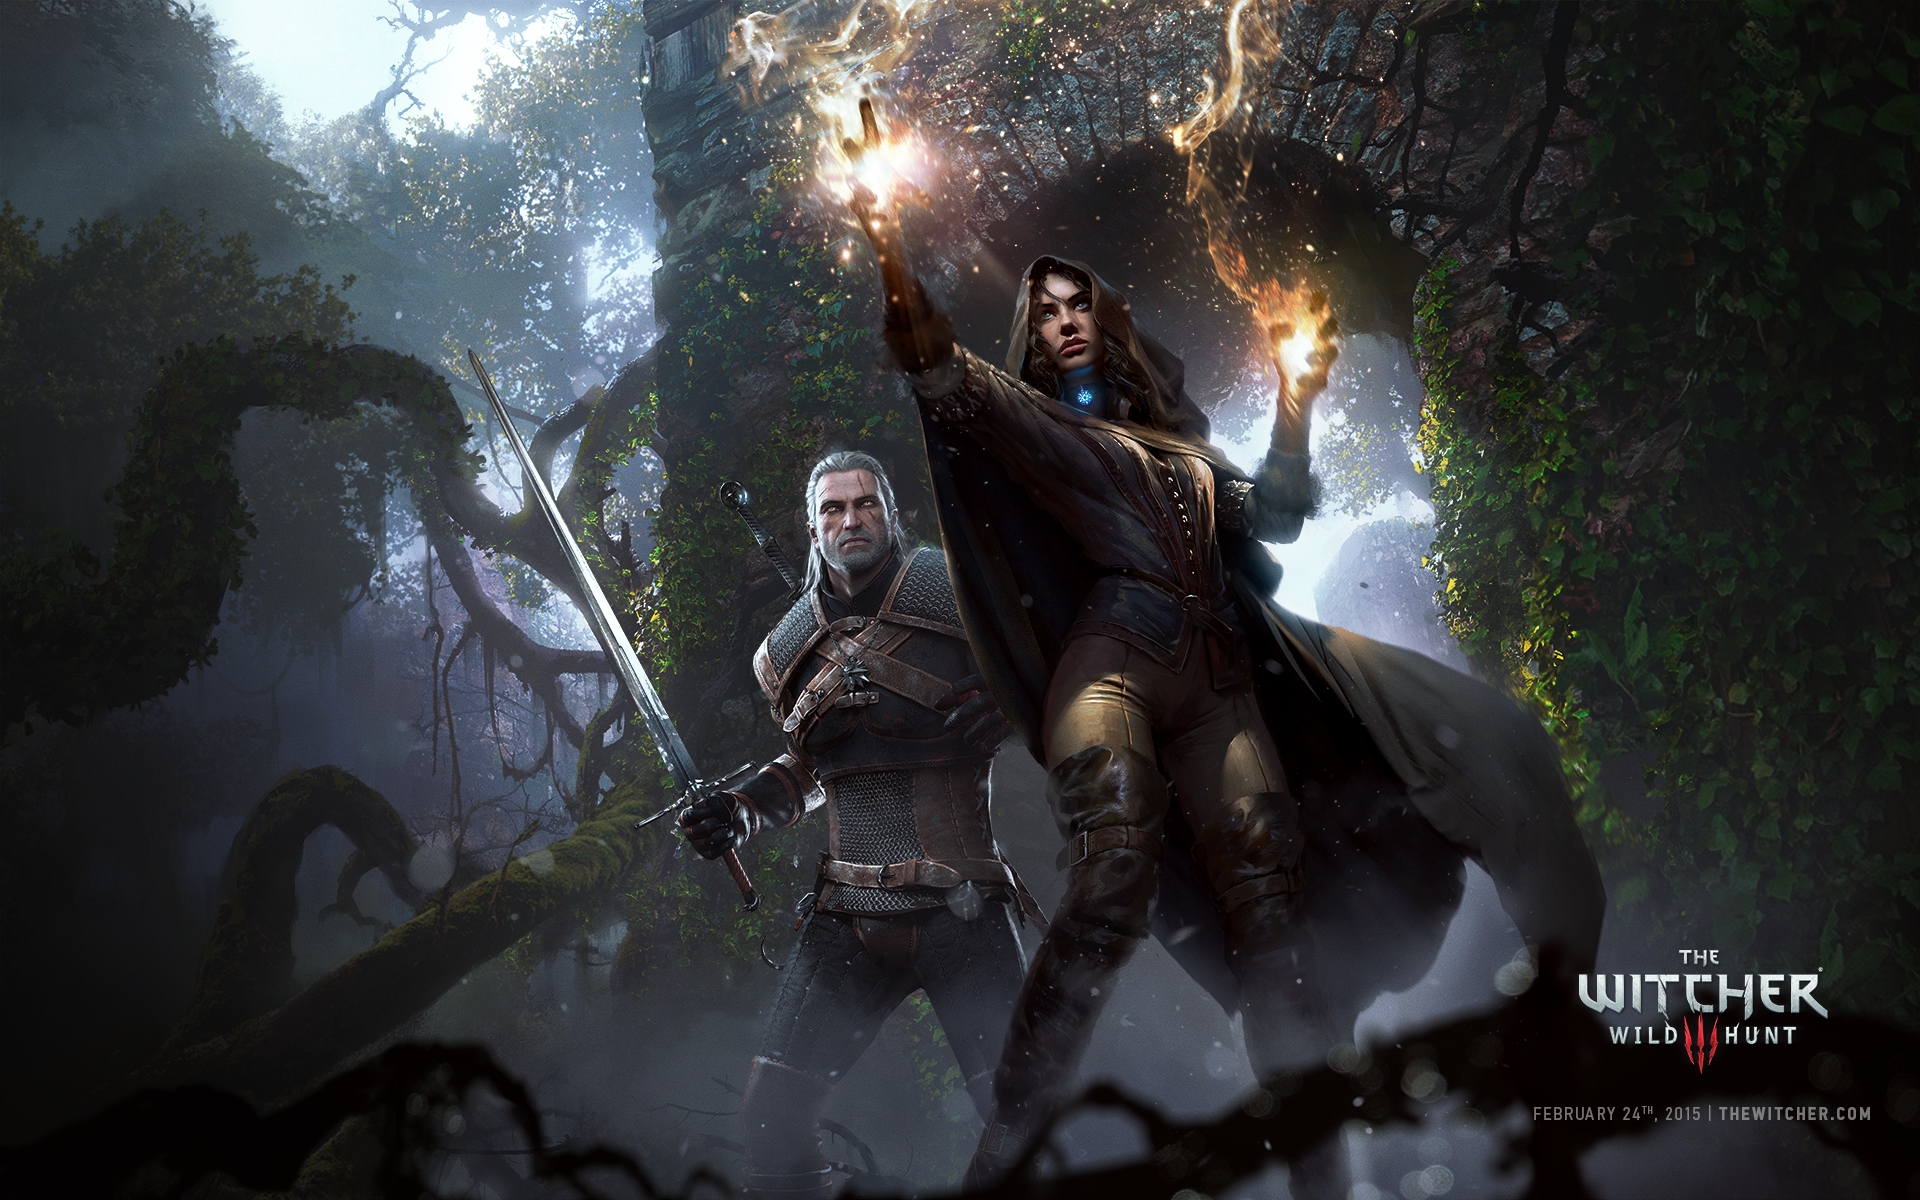 yennefer of vengerberg, the witcher, video game, the witcher 3: wild hunt, geralt of rivia